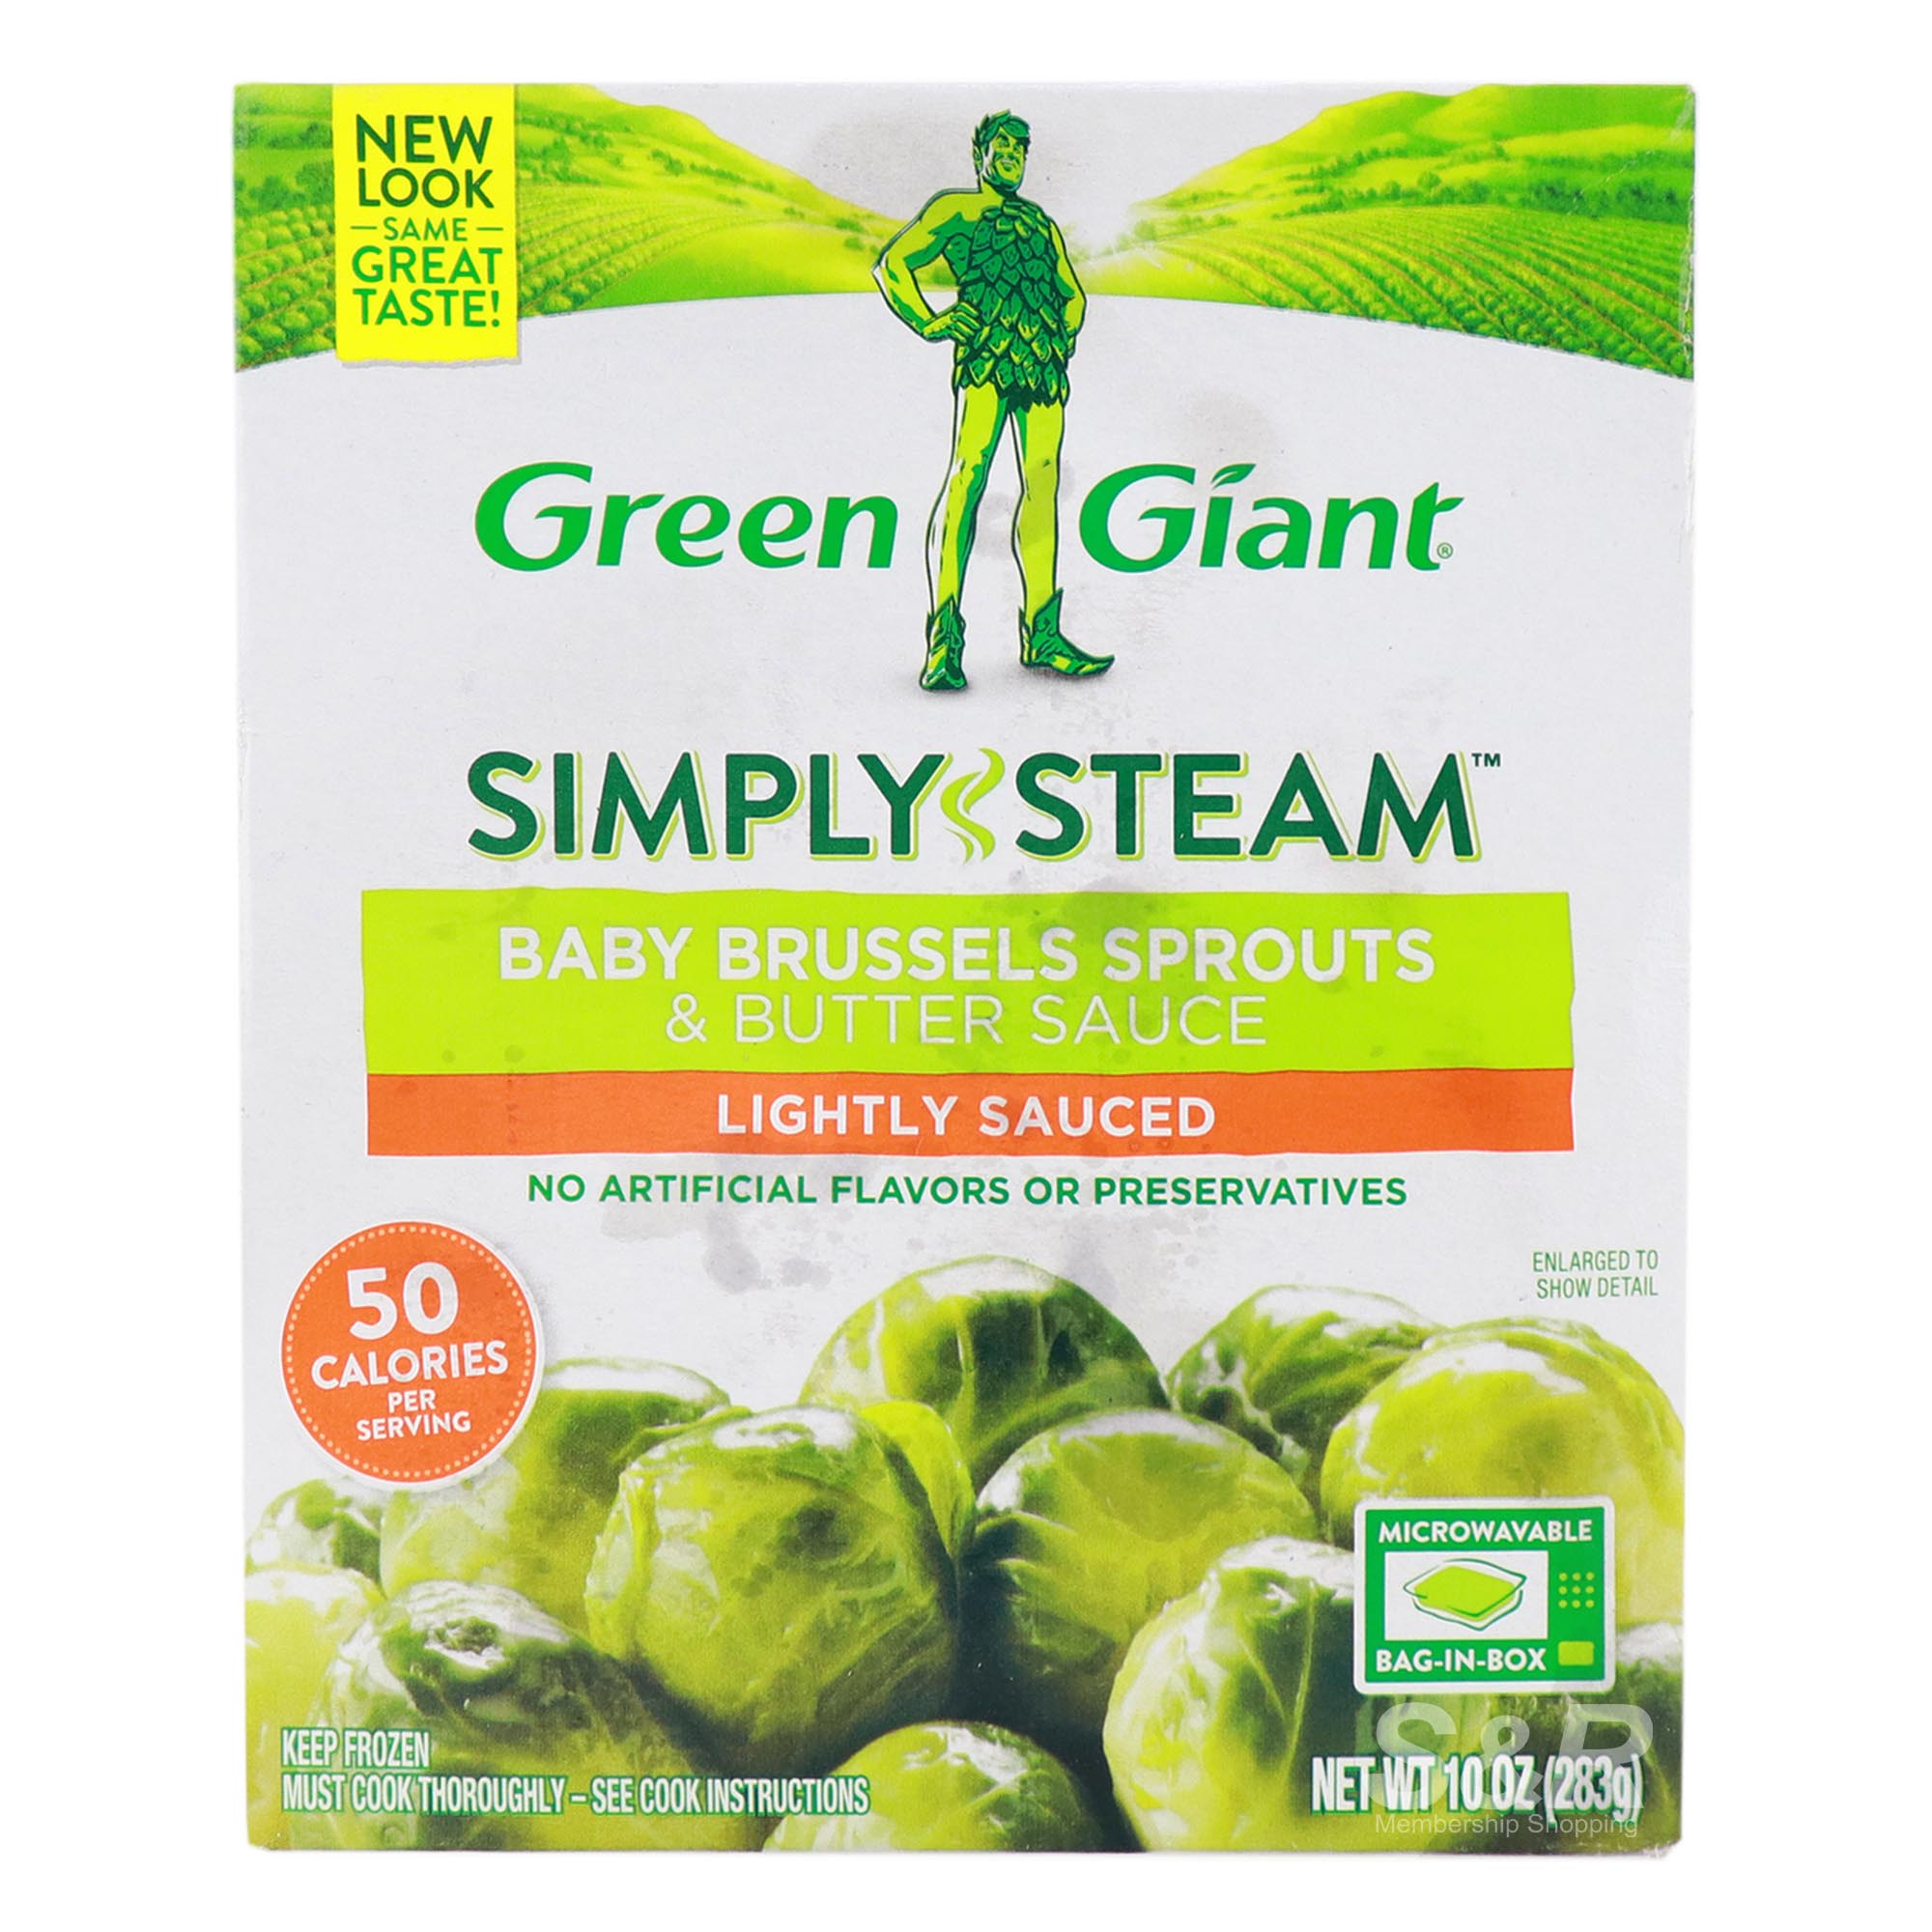 Green Giant Simply Steam Baby Brussel Sprouts and Butter Sauce 283g